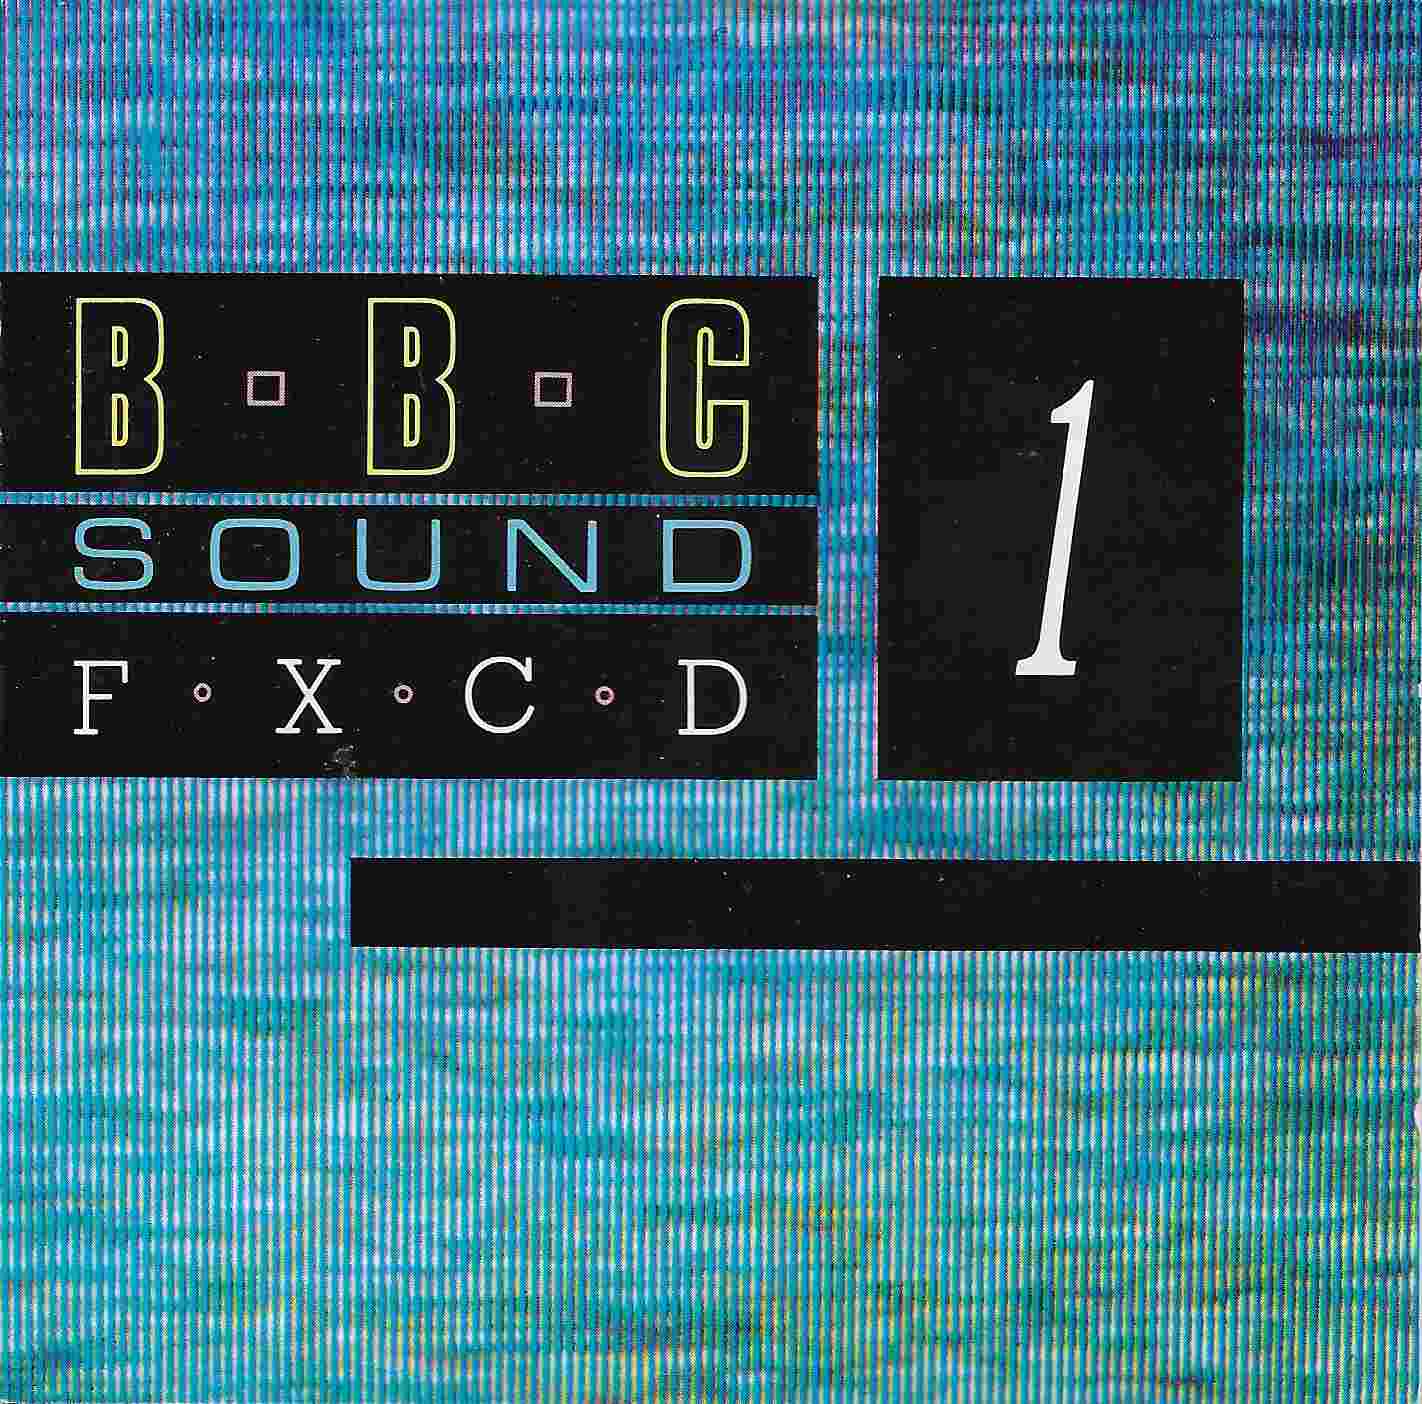 Front cover of BBCCD SFX001